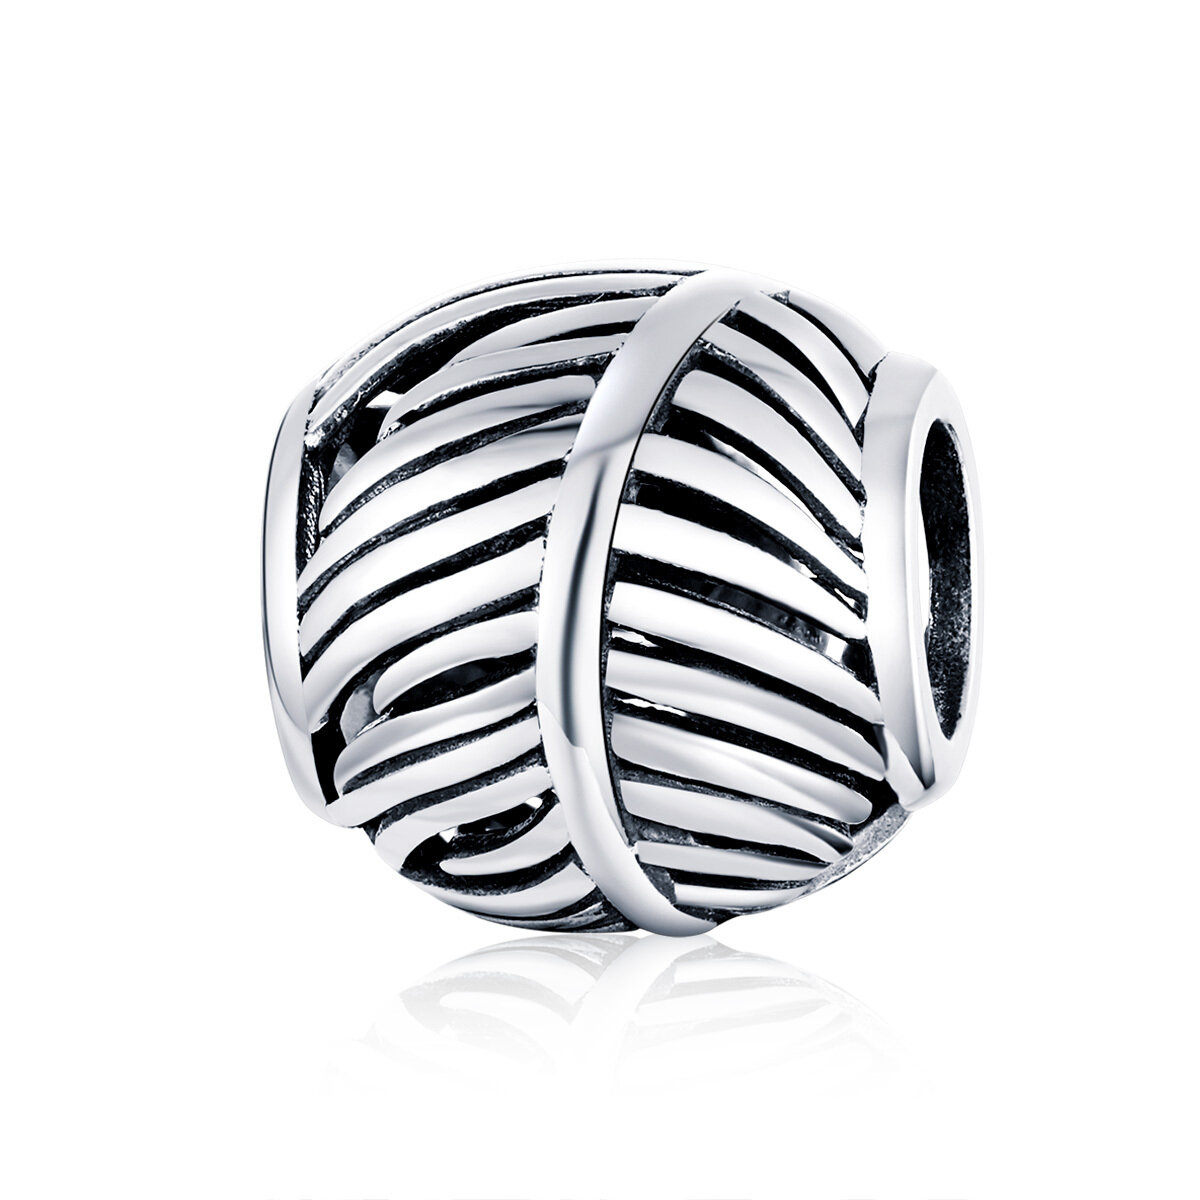 GemKing SCC1509 Feather bead S925 Sterling Silver Charm